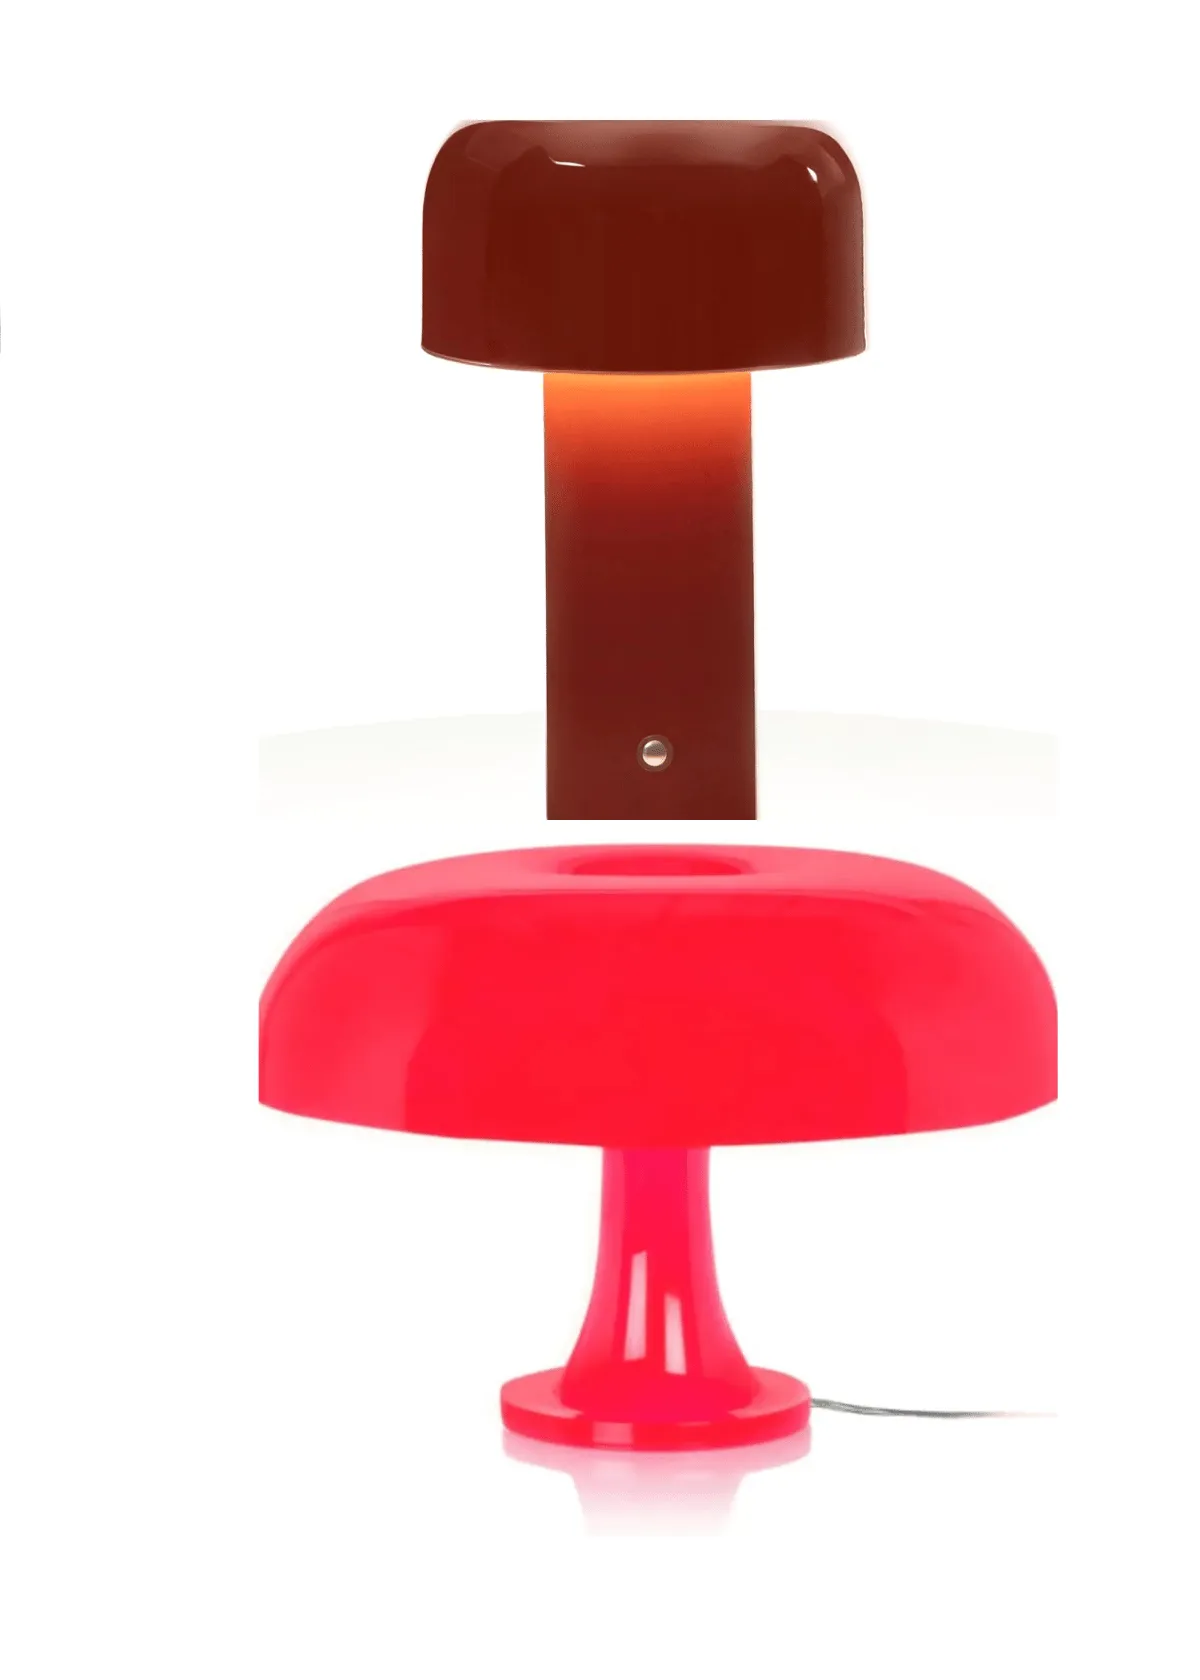 "Red Mushroom Lamp: Add a Touch of Whimsy to Your Home Decor"